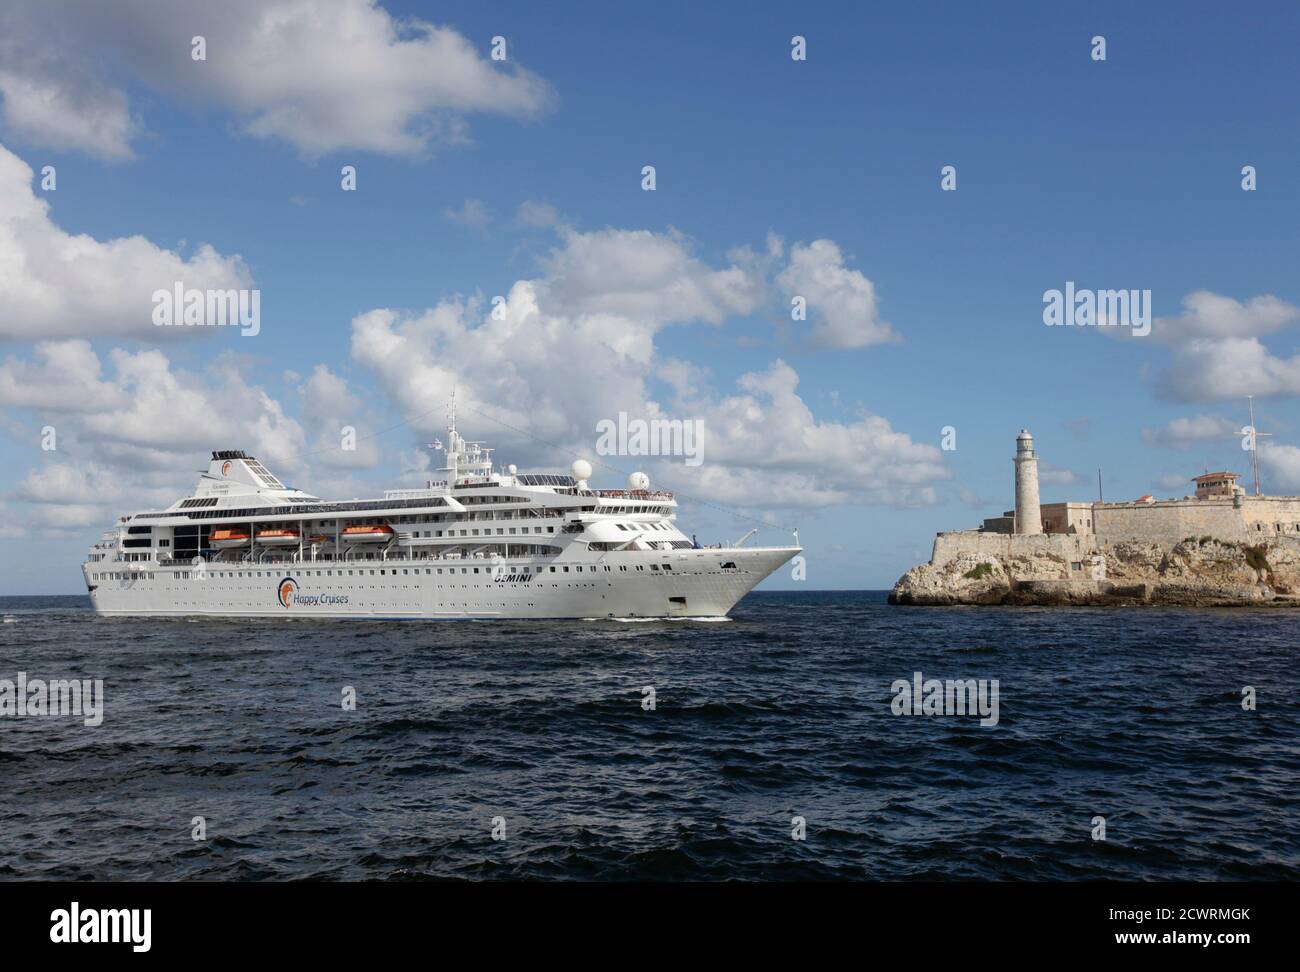 Spanish cruise ship 'Gemini' passes the lighthouse of the colonial fortress Morro Cabana as it enters Havana Harbor November 12, 2010. Spanish company Happy Cruises will home-port its 'Gemini' ship in Havana and will offer around-Cuba cruises.  REUTERS/Desmond Boylan (CUBA - Tags: SOCIETY TRAVEL BUSINESS) Stock Photo